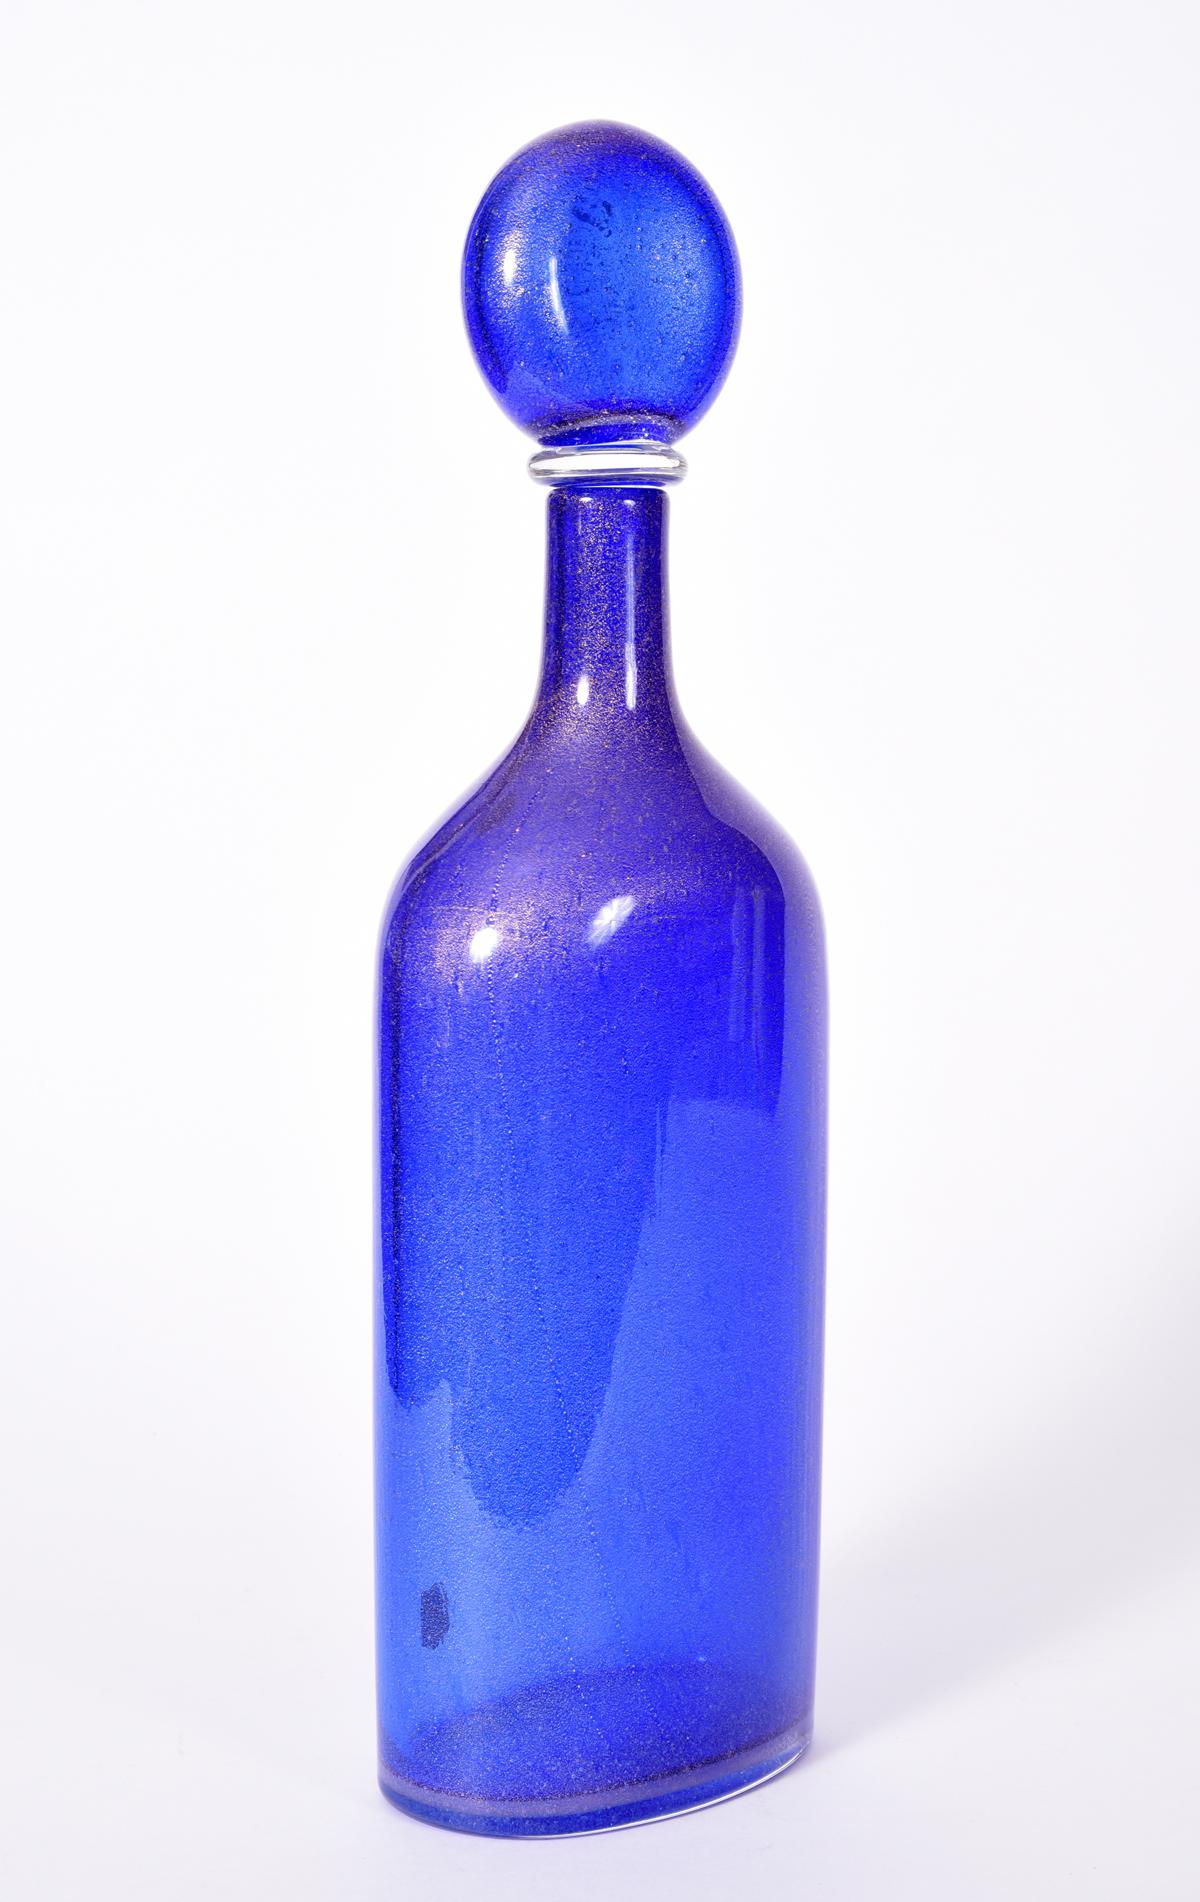 Mid-20th century cobalt blue with gold fleck Murano glass decanter. The decanter is in excellent condition, maker's mark undersigned. The decanter stand about 16.5 inches X 5.5 inches X 3 inches.